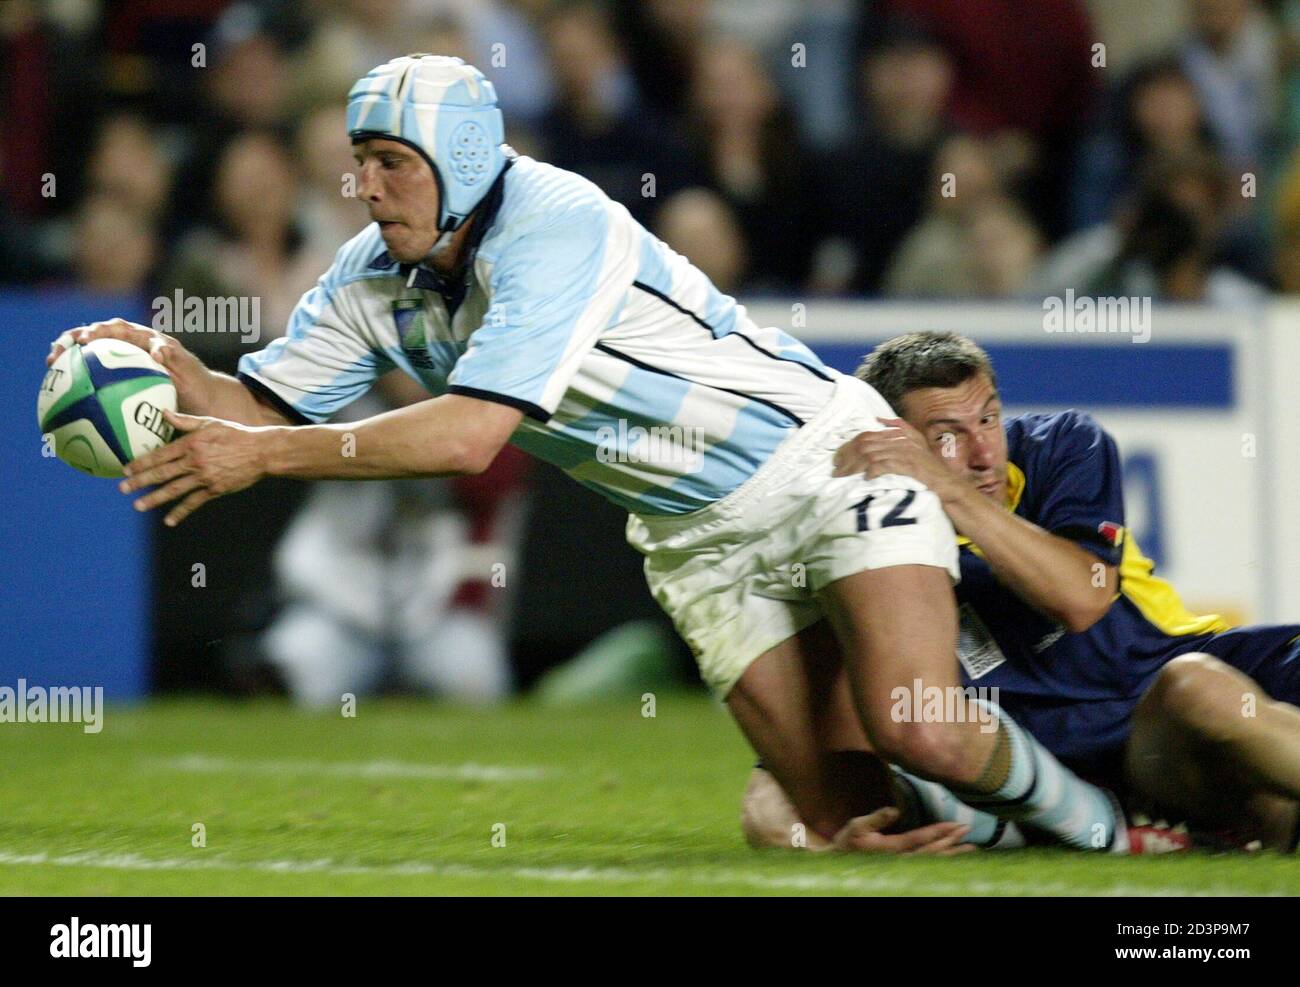 Argentina's Manuel Contepomi breaks past Romania's Mihai Vioreanu to score  during their 2003 Rugby World Cup